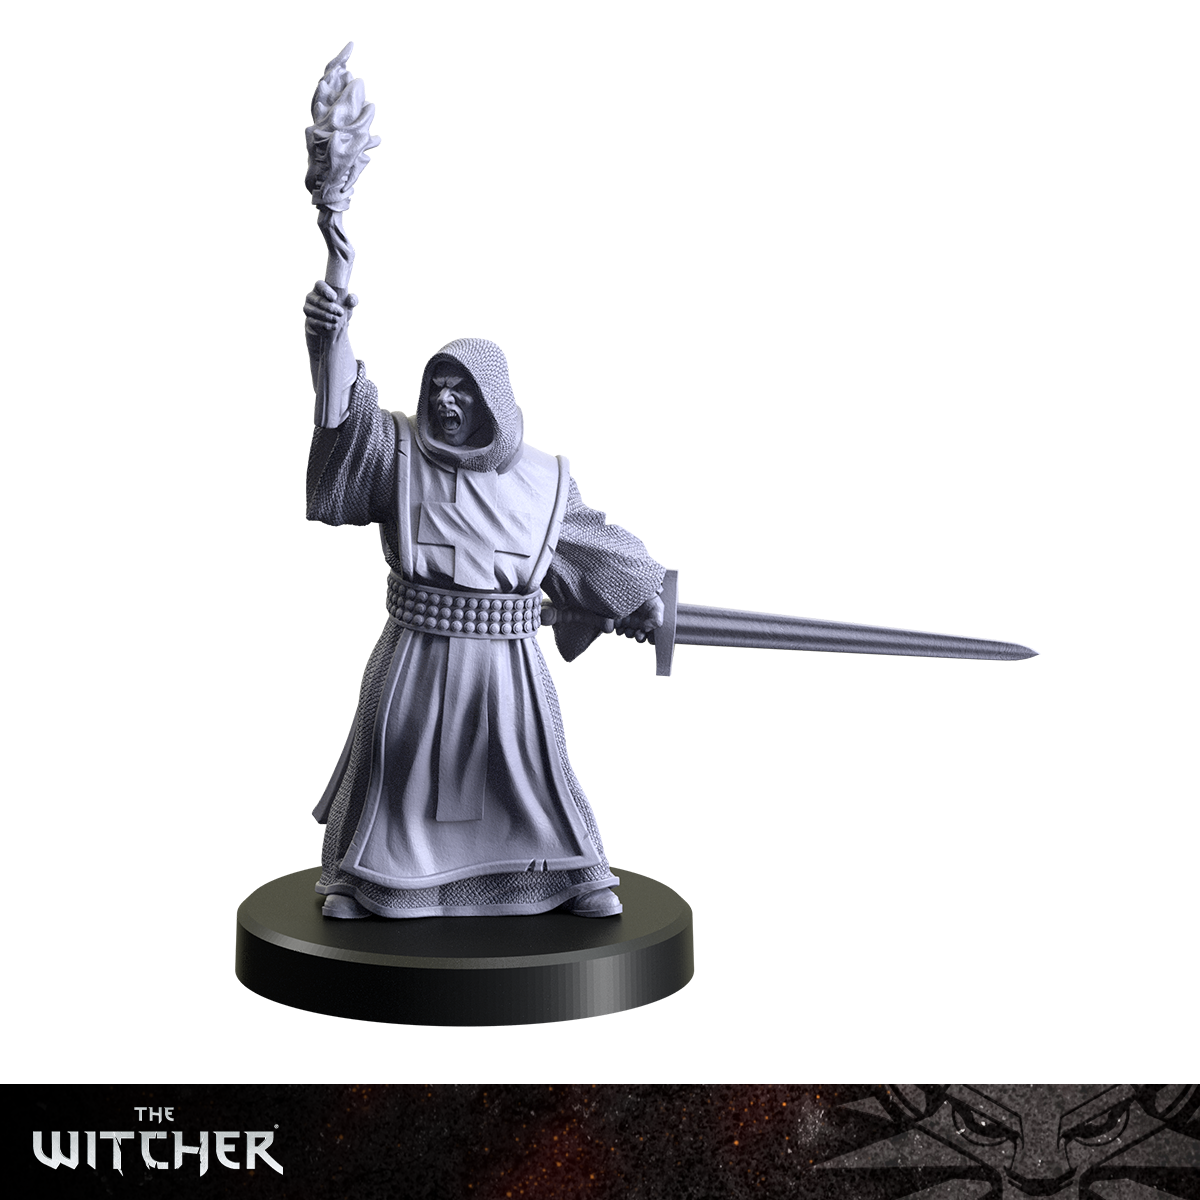 The Witcher - Classes 3: Doctor, Priest, Man-at-Arms